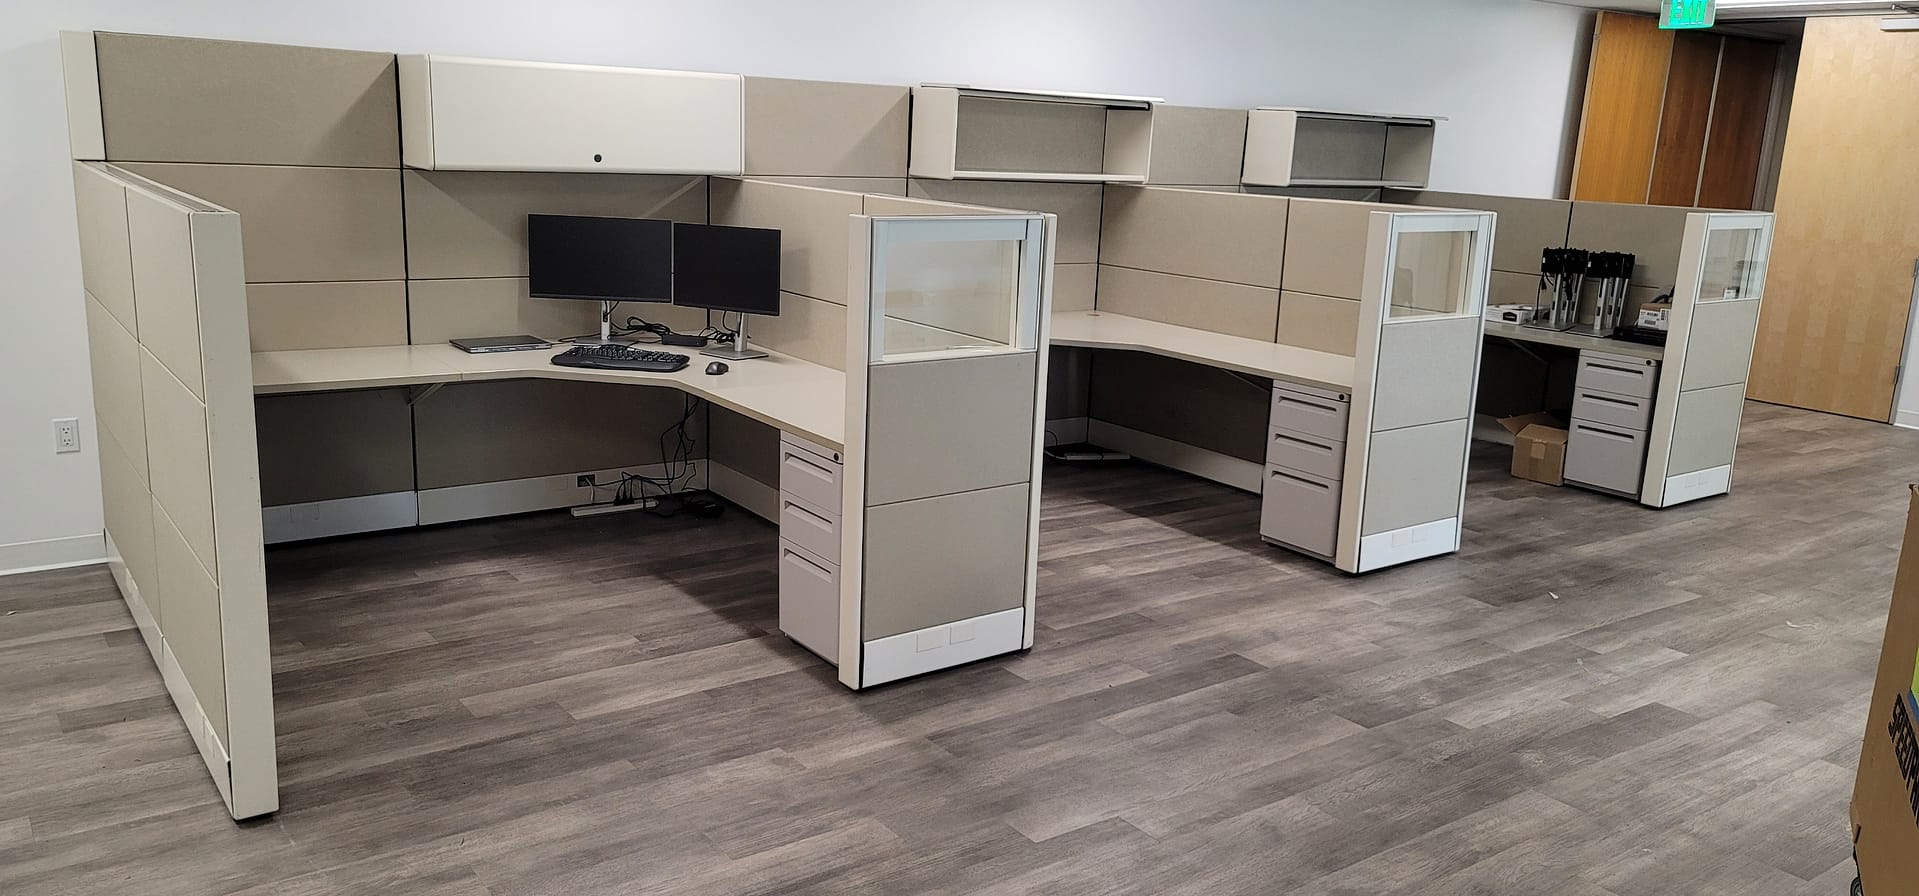 Pre Owned Cubicles, Used Cubicles, Cubicles, Refurbished cubicles, Cubicles for Sale